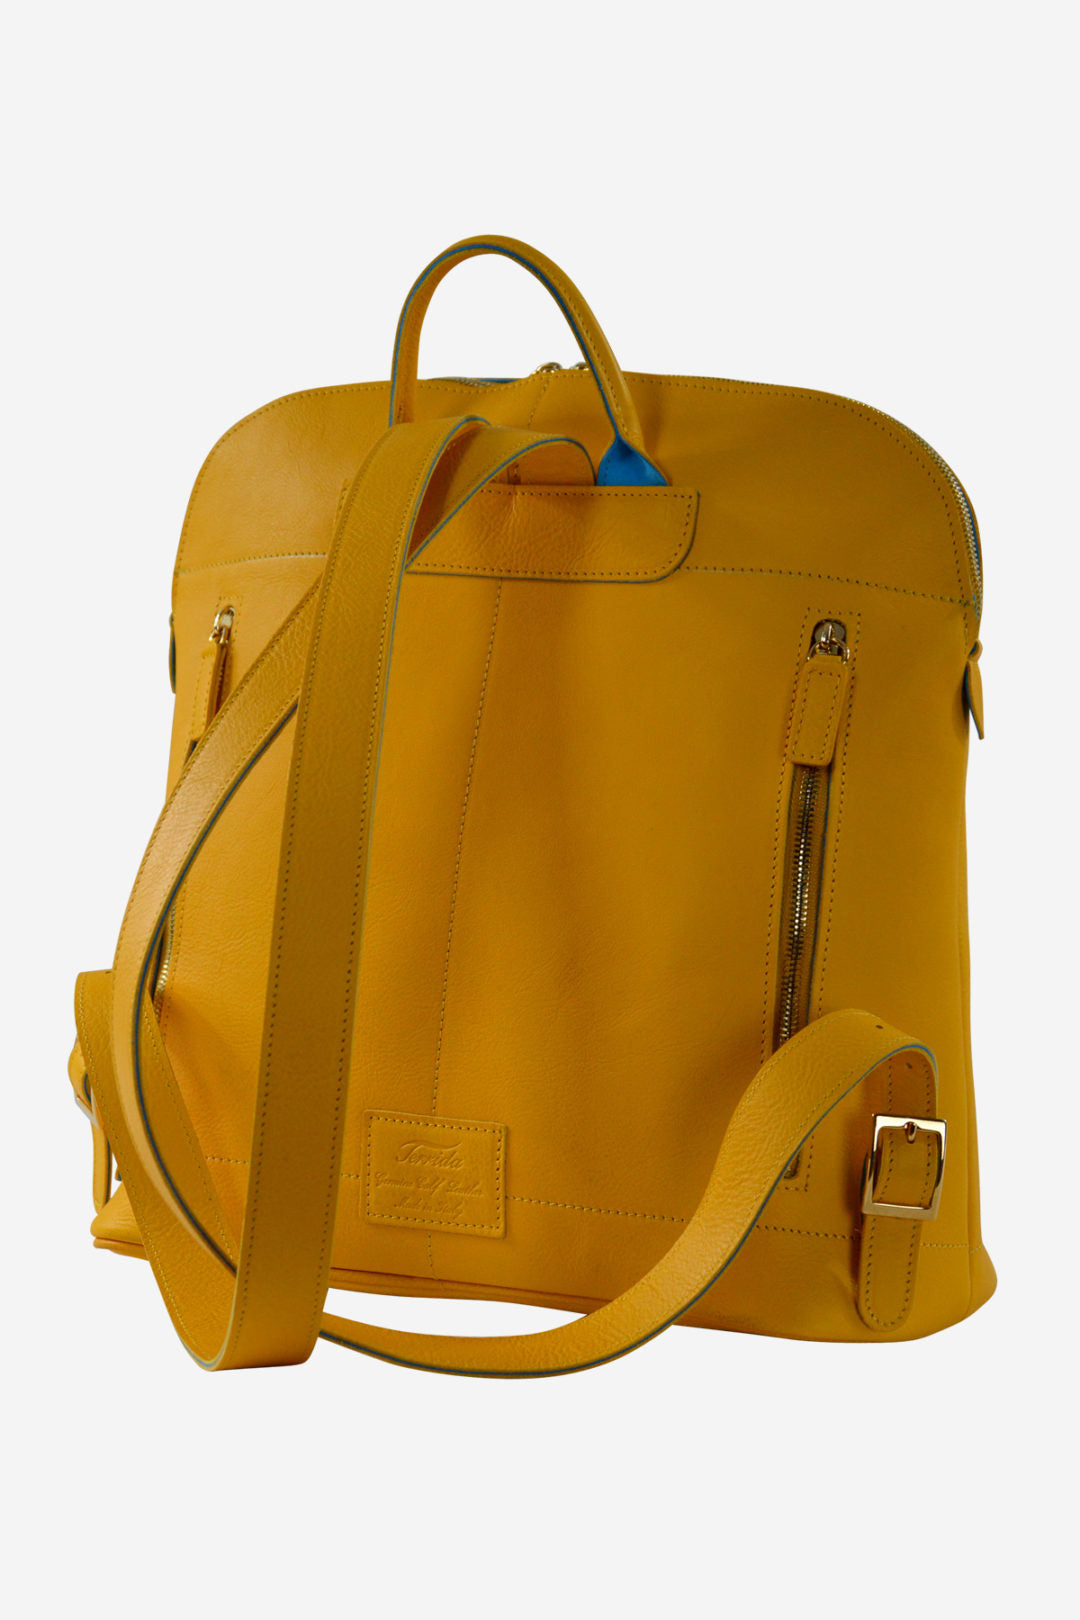 Home › Murano Leather Backpack (Available in 6 Colors)